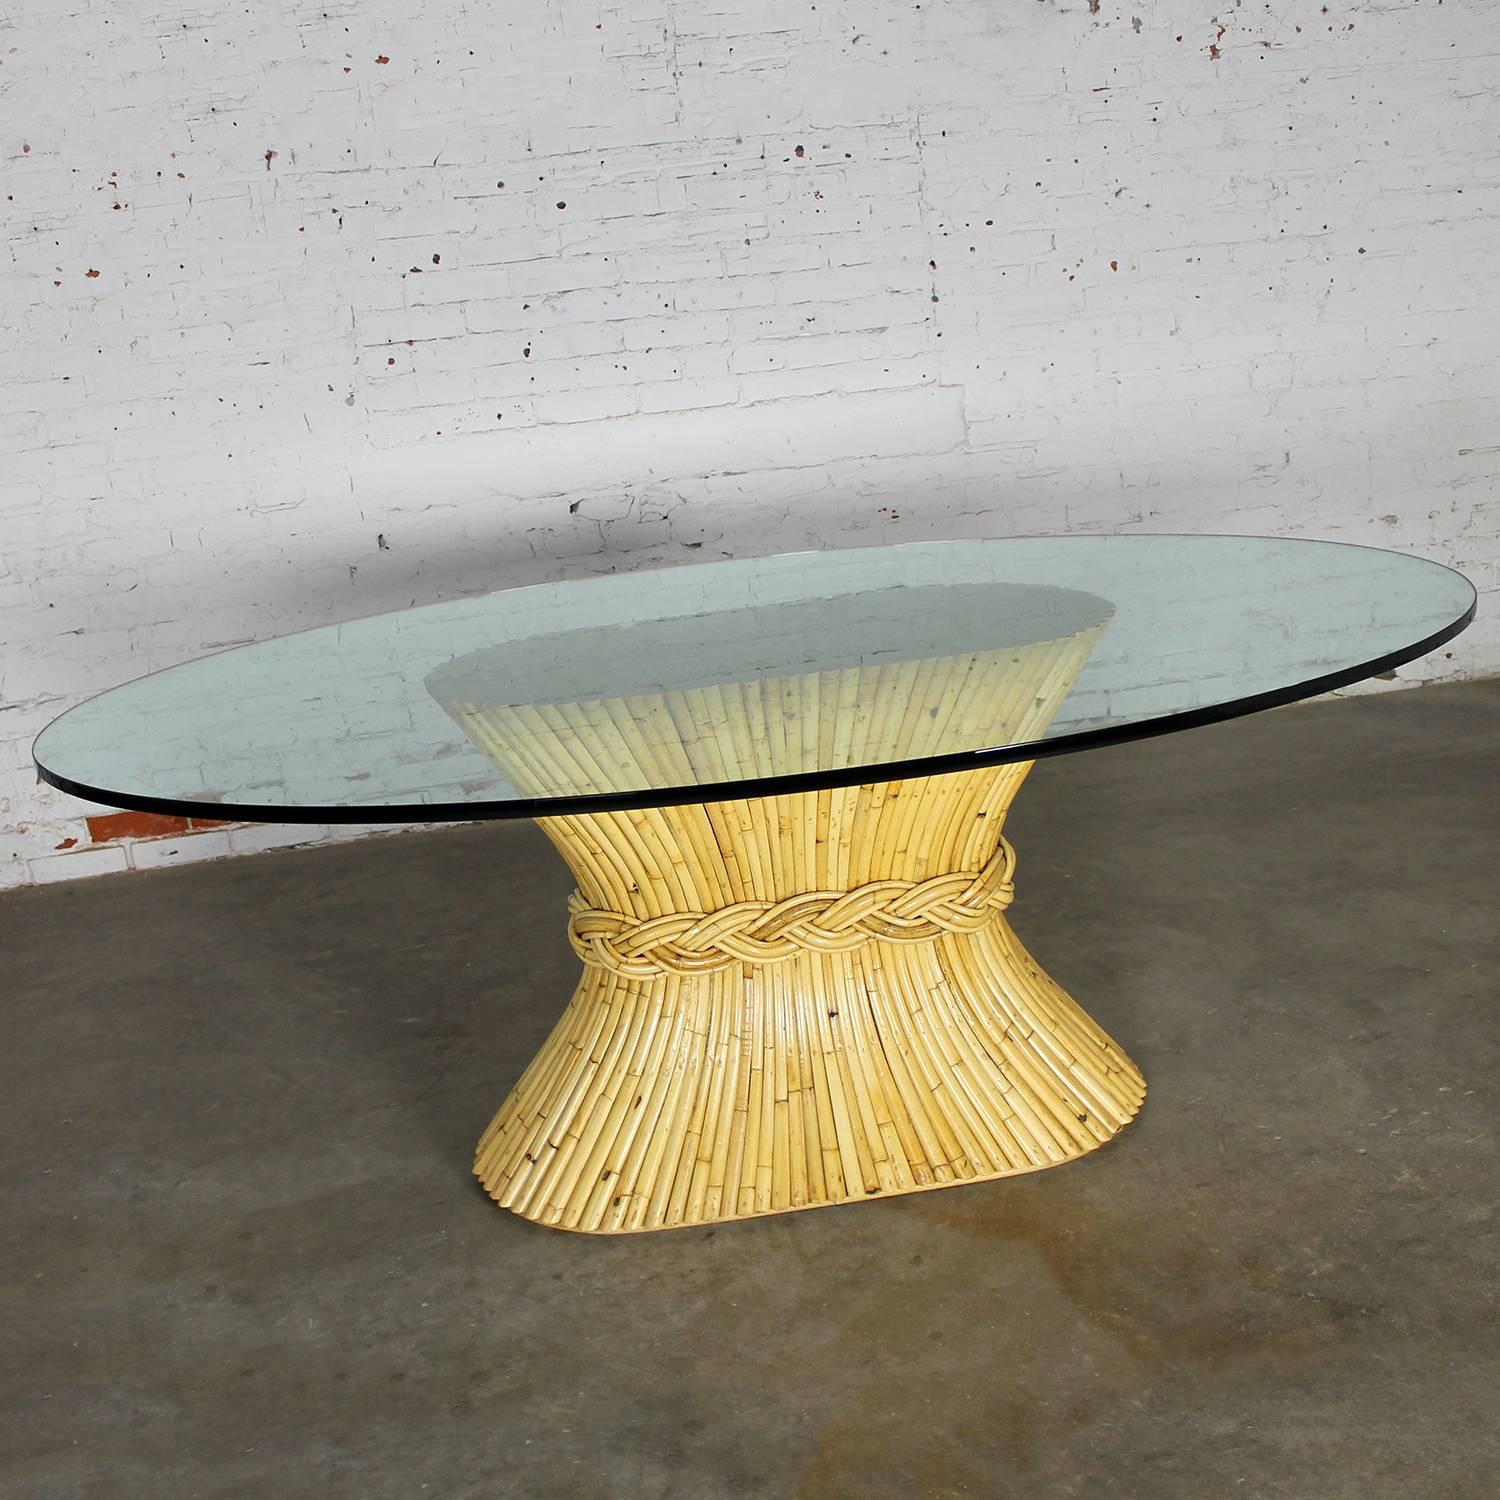 Vintage oval sheaf-of-wheat style rattan dining table by McGuire Furniture. Table is in wonderful vintage condition with normal wear and tear. The glass top does have one chip and may have some small scratches which come with age. We will sell and